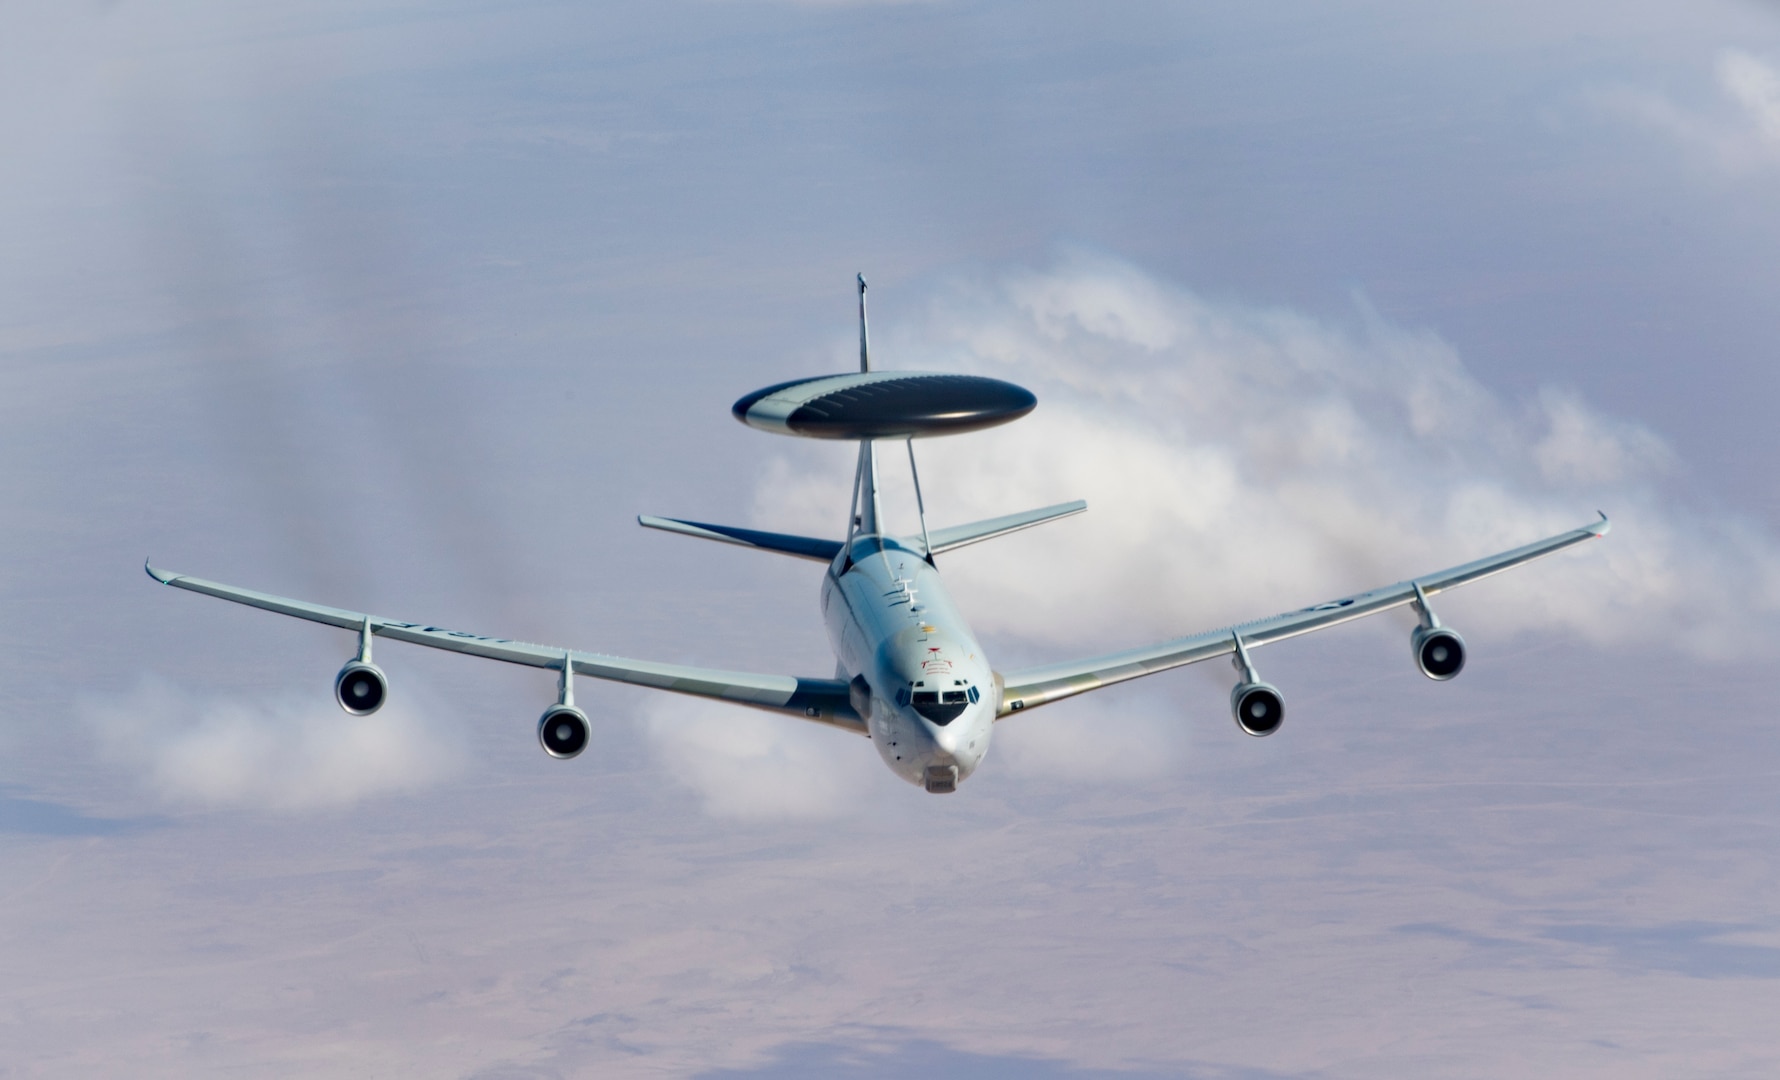 A U.S. Air Force E-3 Sentry flies toward a KC-135 Stratotanker for refueling Feb. 28, 2019, while flying in support of Operation Inherent Resolve. The E-3 Sentry is an airborne warning and control system, or AWACS, aircraft with an integrated command and control battle management, or C2BM, surveillance, target detection, and tracking platform.  The aircraft provides an accurate, real-time picture of the battlespace to the Joint Air Operations Center. (U.S. Air Force photo/Staff Sgt. Clayton Cupit)